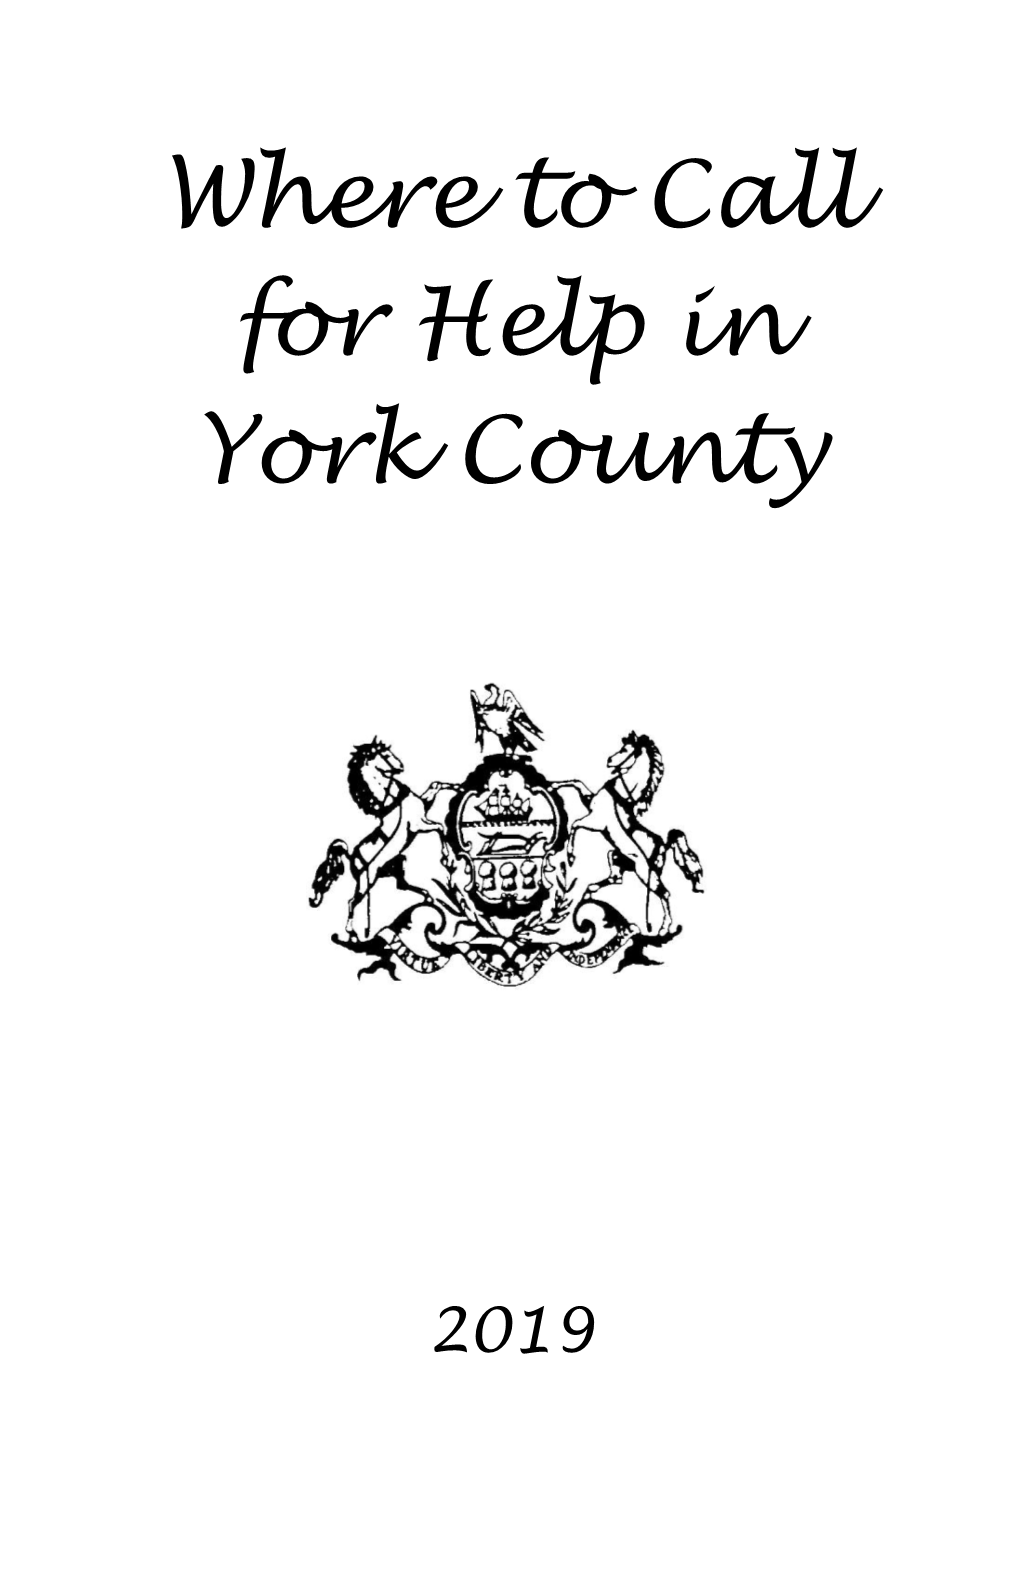 Where to Call for Help in York County